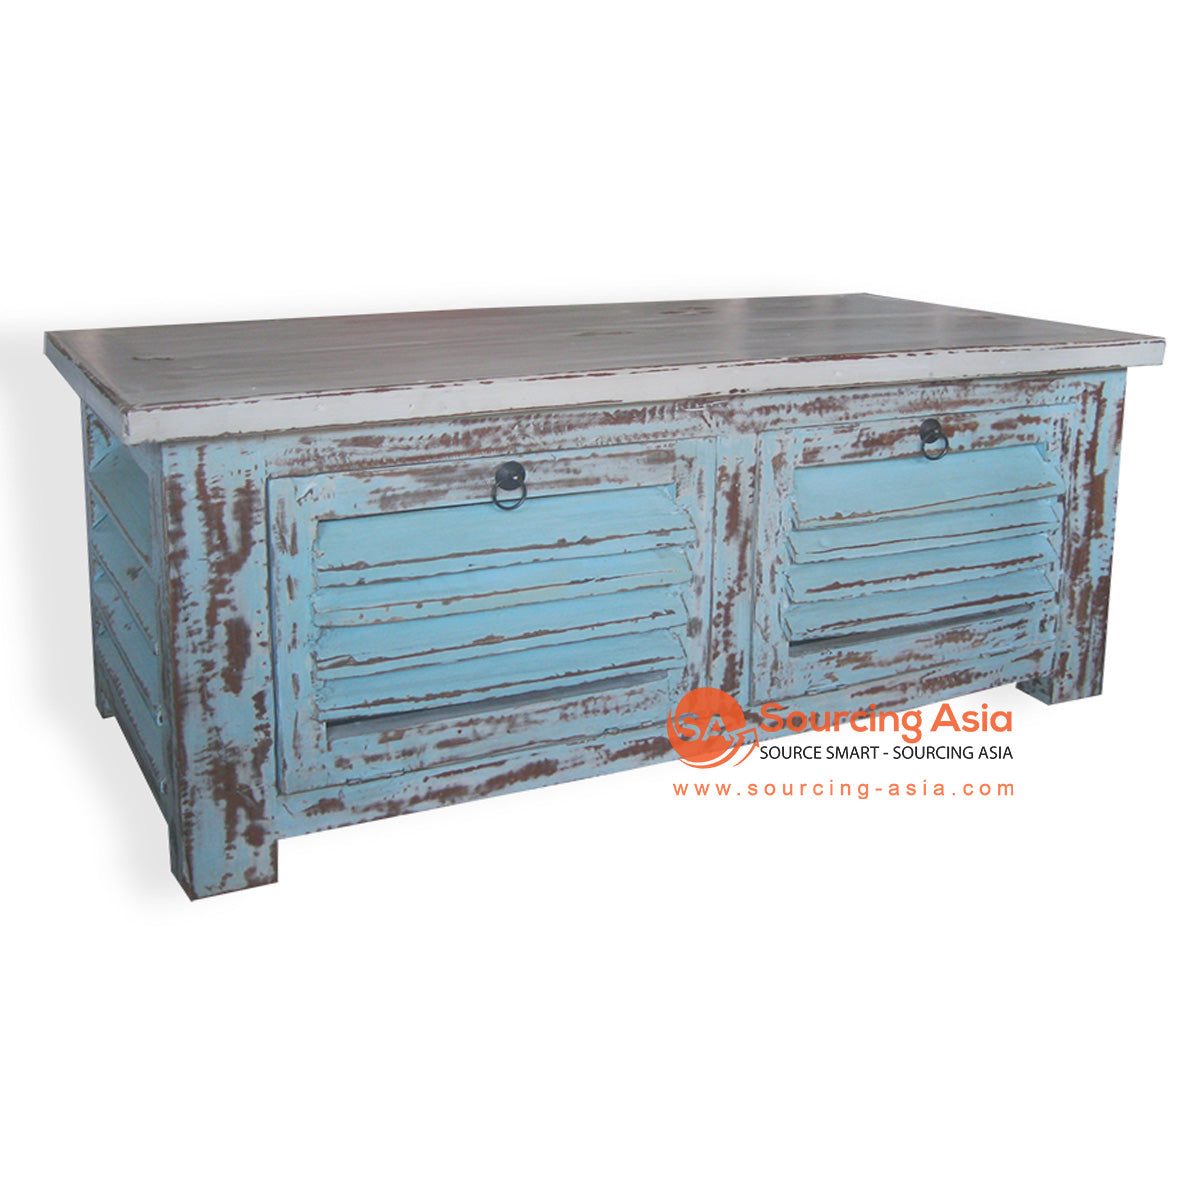 SIX025 ANTIQUE TURQUOISE RECYCLED TEAK WOOD TWO DRAWERS COFFEE TABLE